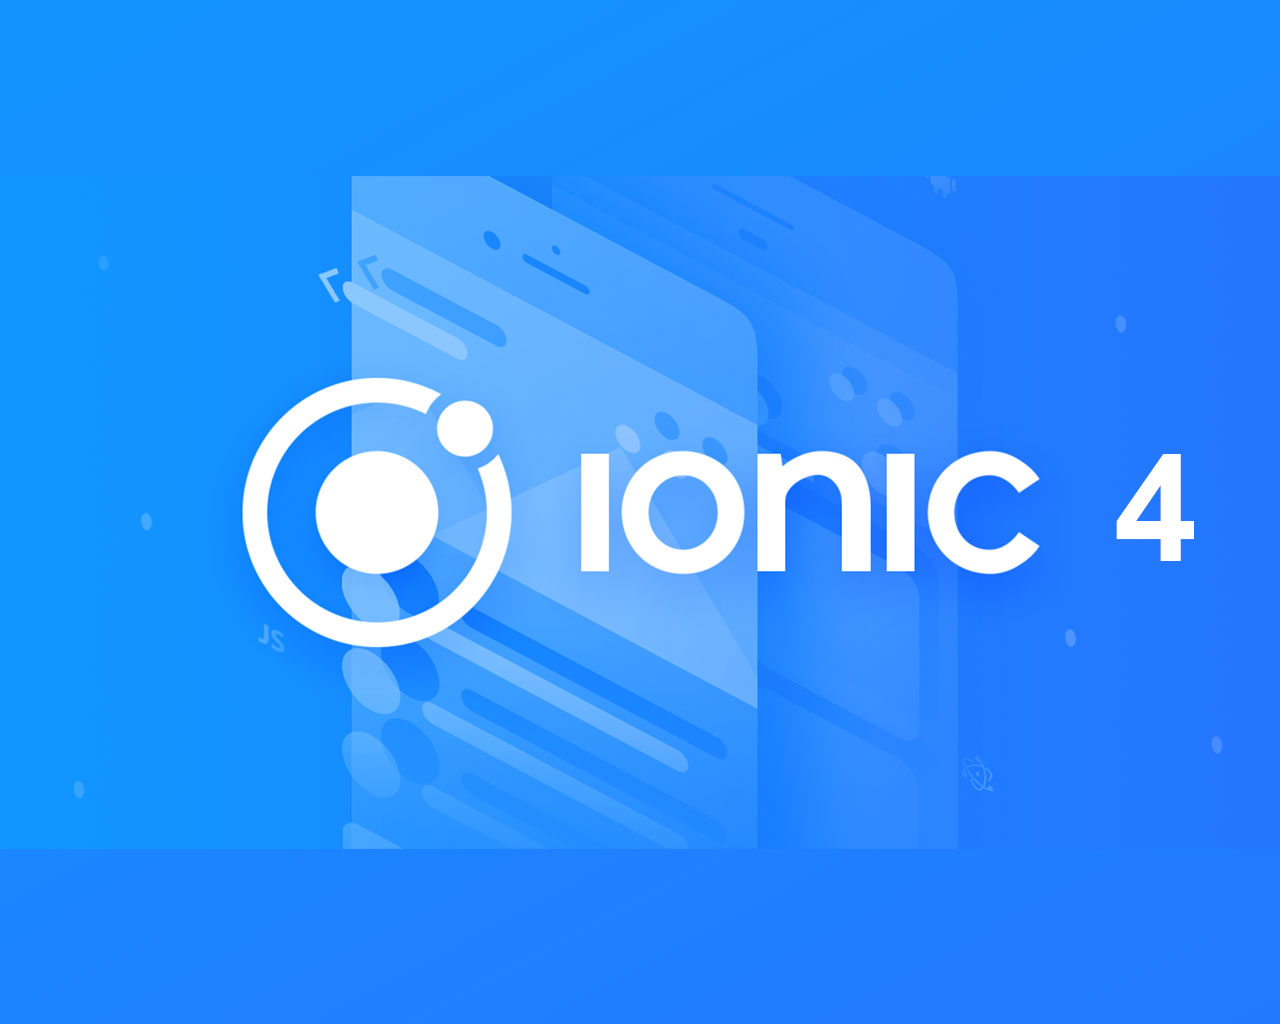 Release of Ionic 4